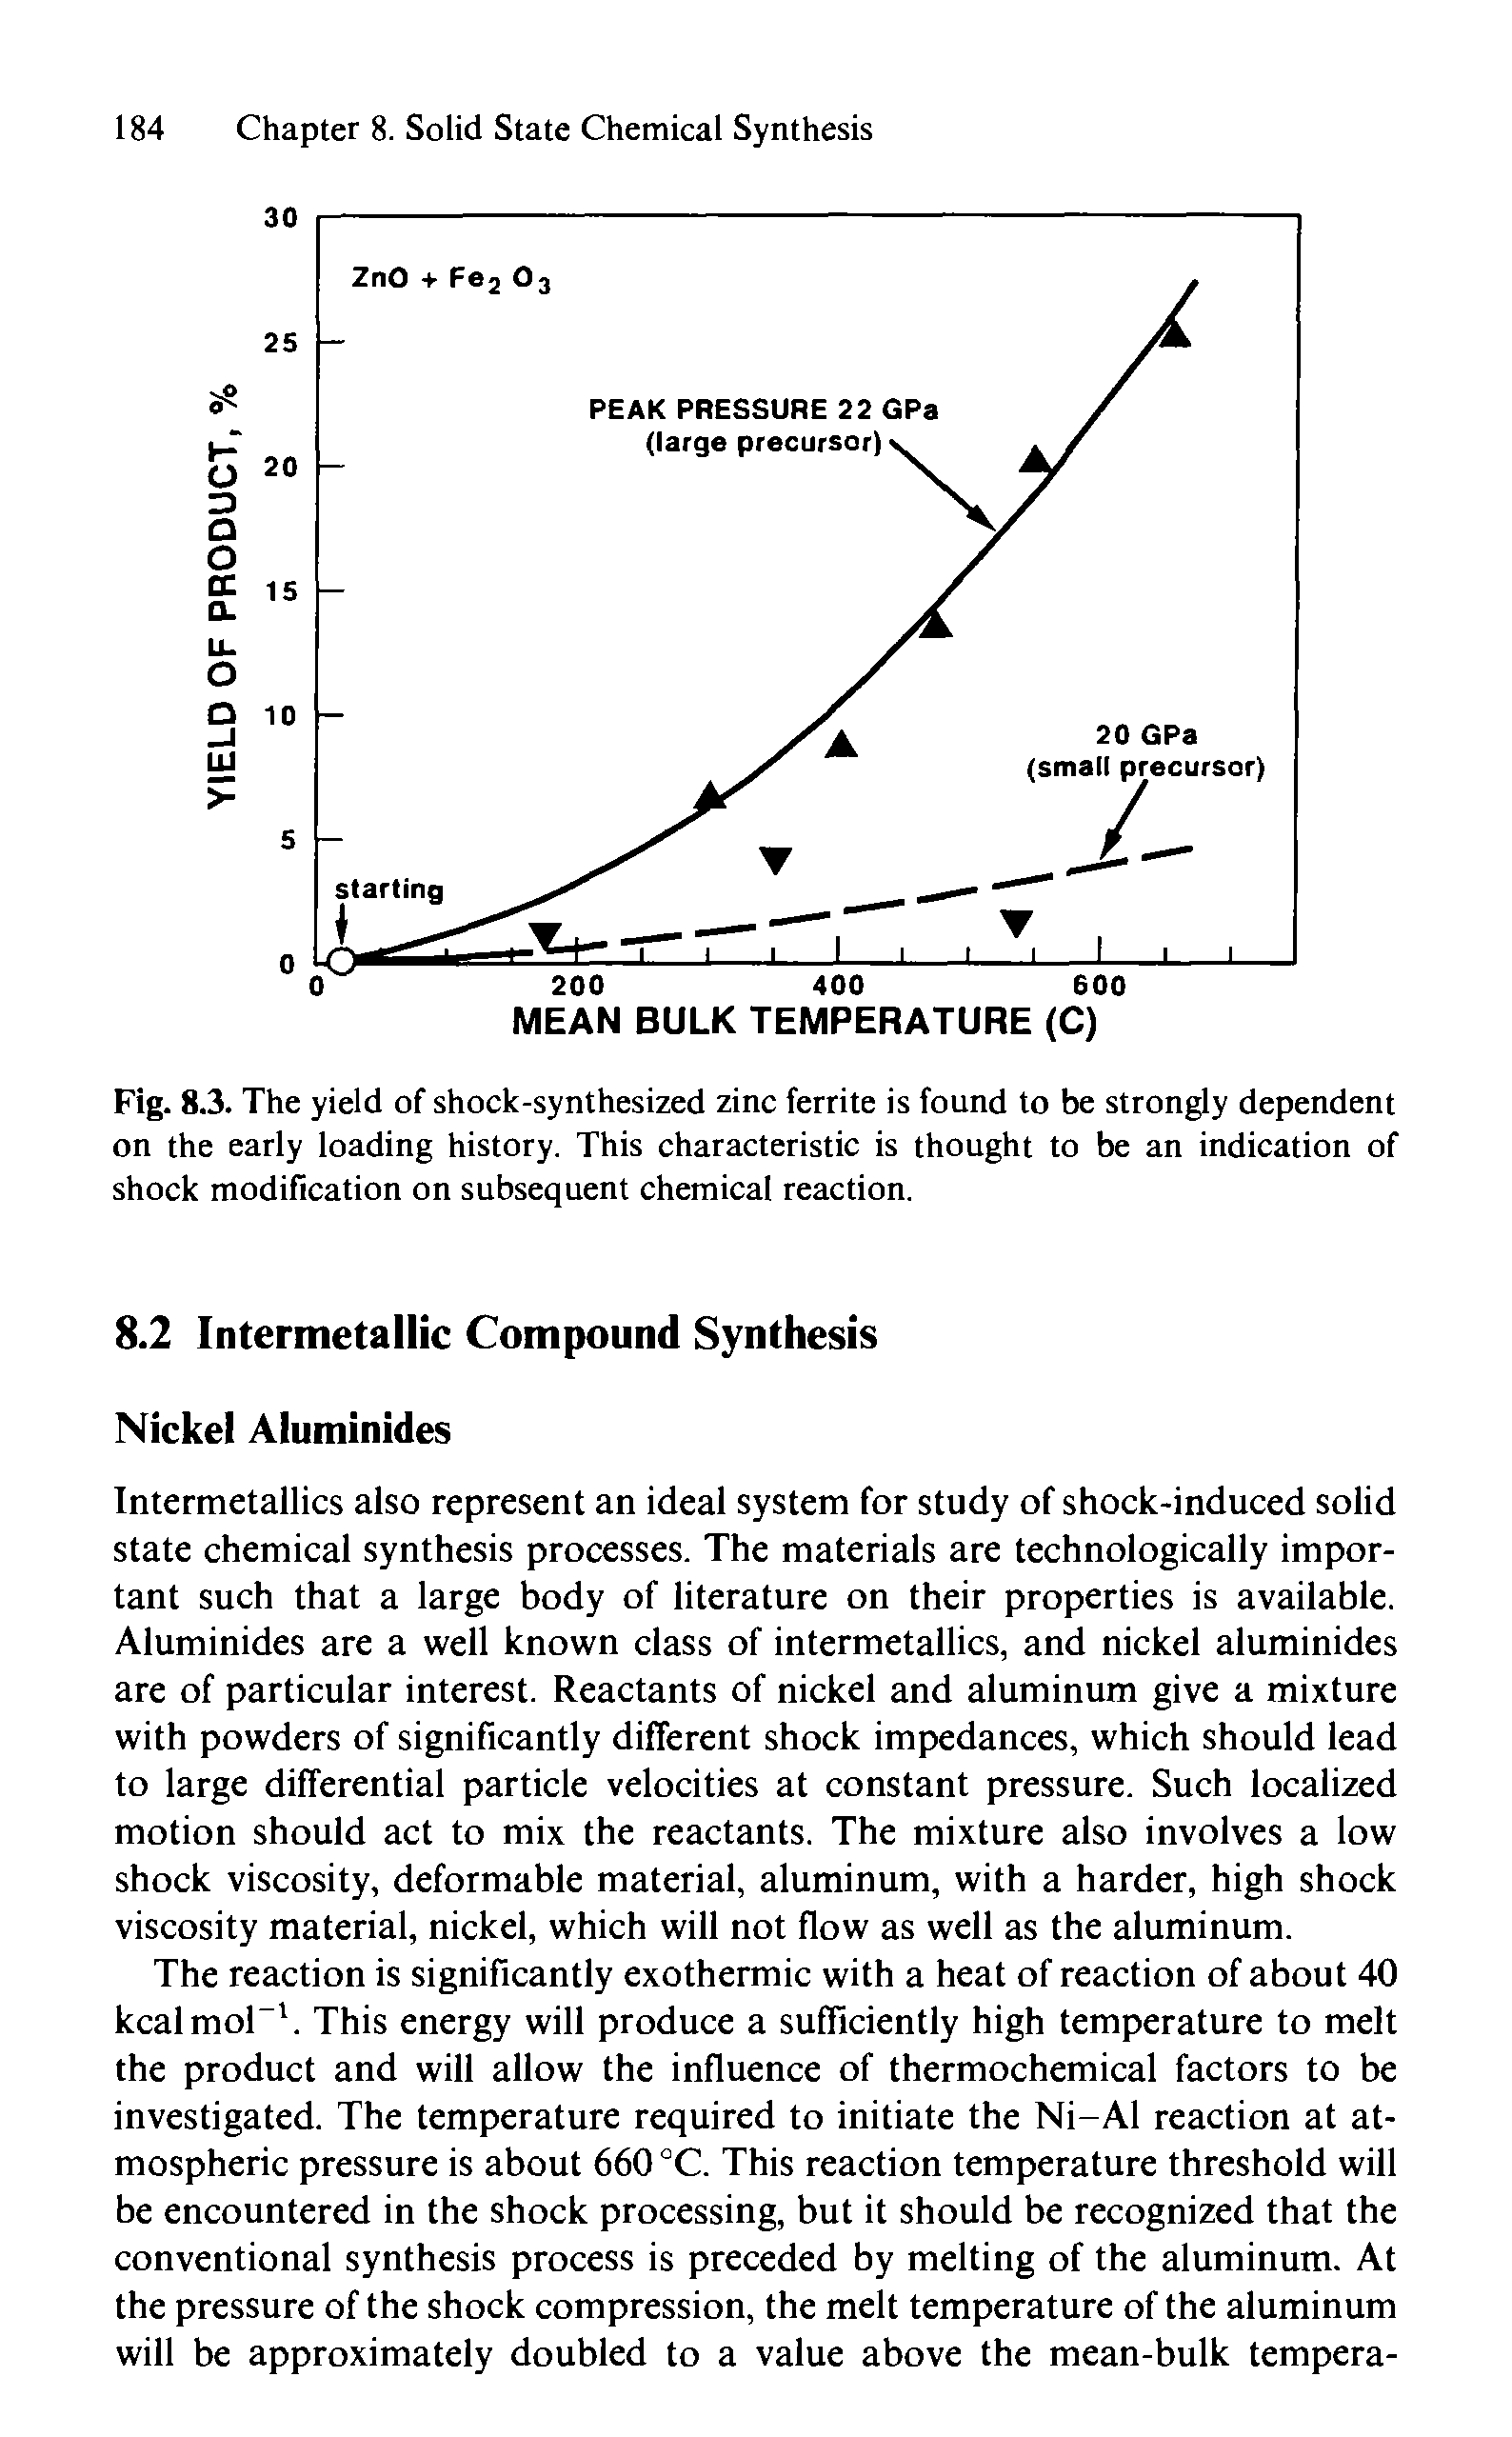 Fig. 8.3. The yield of shock-synthesized zinc ferrite is found to be strongly dependent on the early loading history. This characteristic is thought to be an indication of shock modification on subsequent chemical reaction.